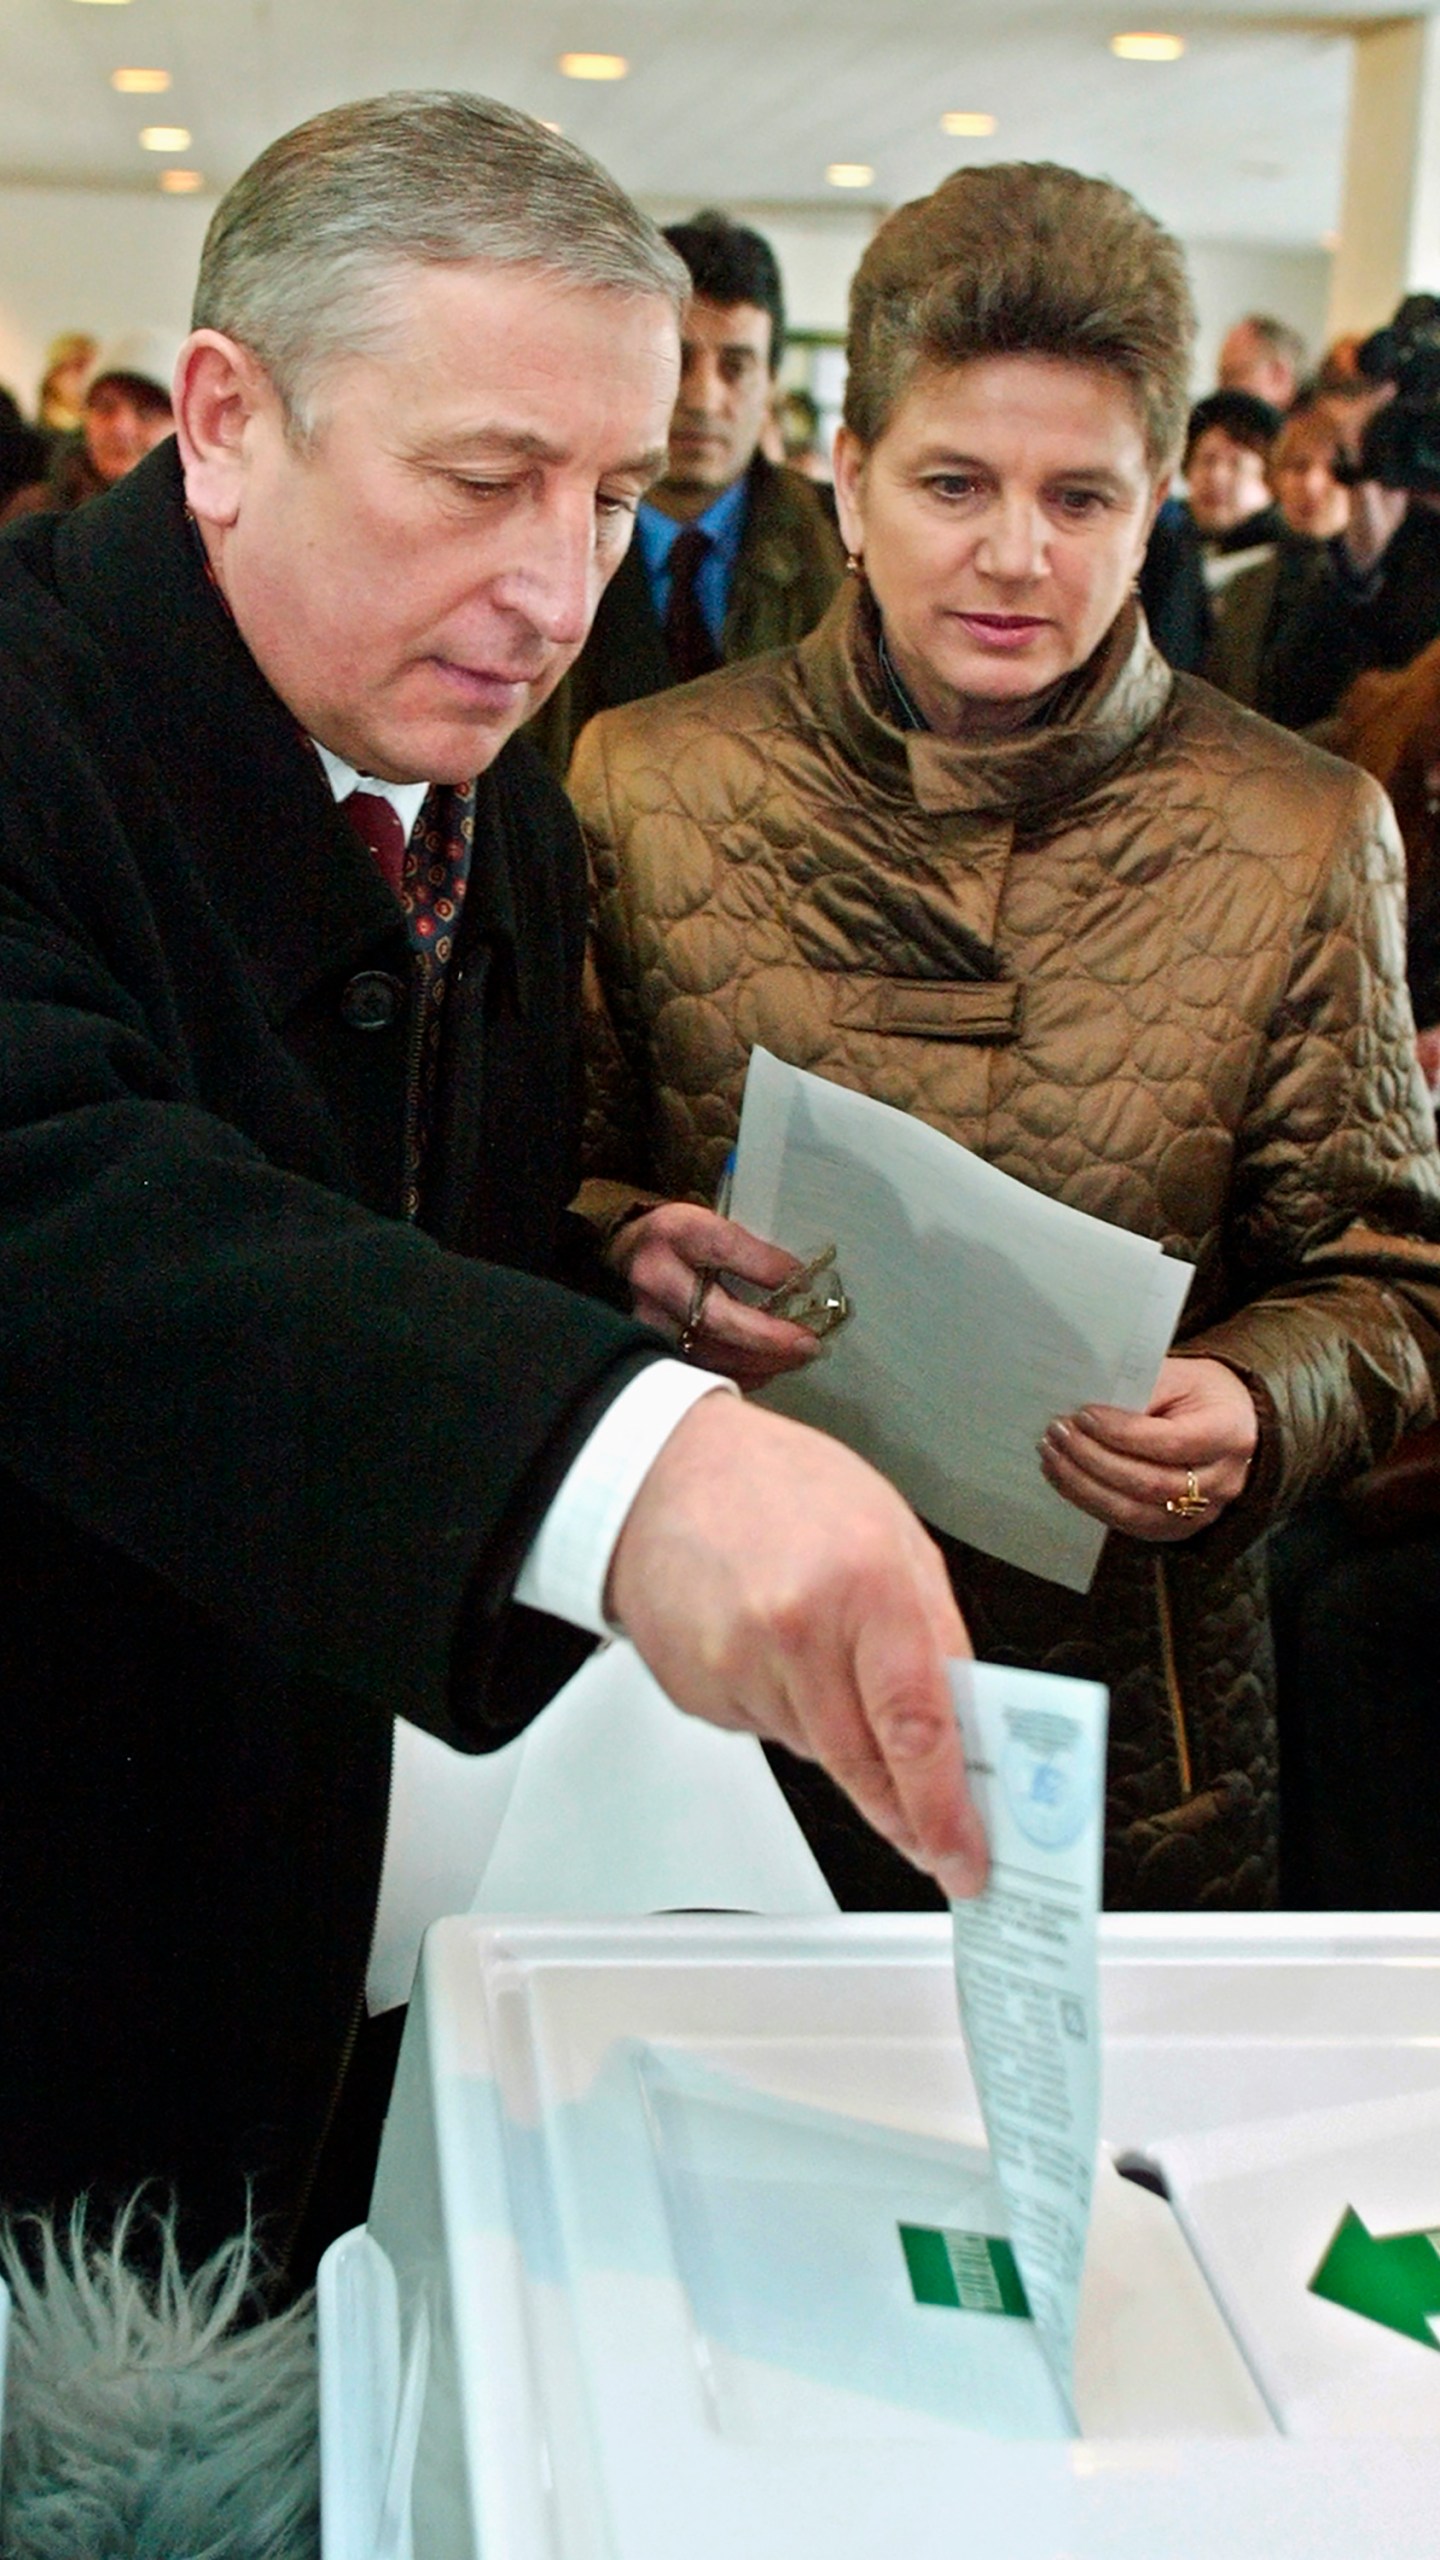 FILE - Russian Communist presidential candidate Nikolai Kharitonov, left, casts his ballot as his wife Nina, right, looks on at a polling station in Moscow, Sunday, March 14, 2004. Kharitonov previously ran against Putin in 2004, finishing a distant second. (AP Photo/Ivan Sekretarev, File)